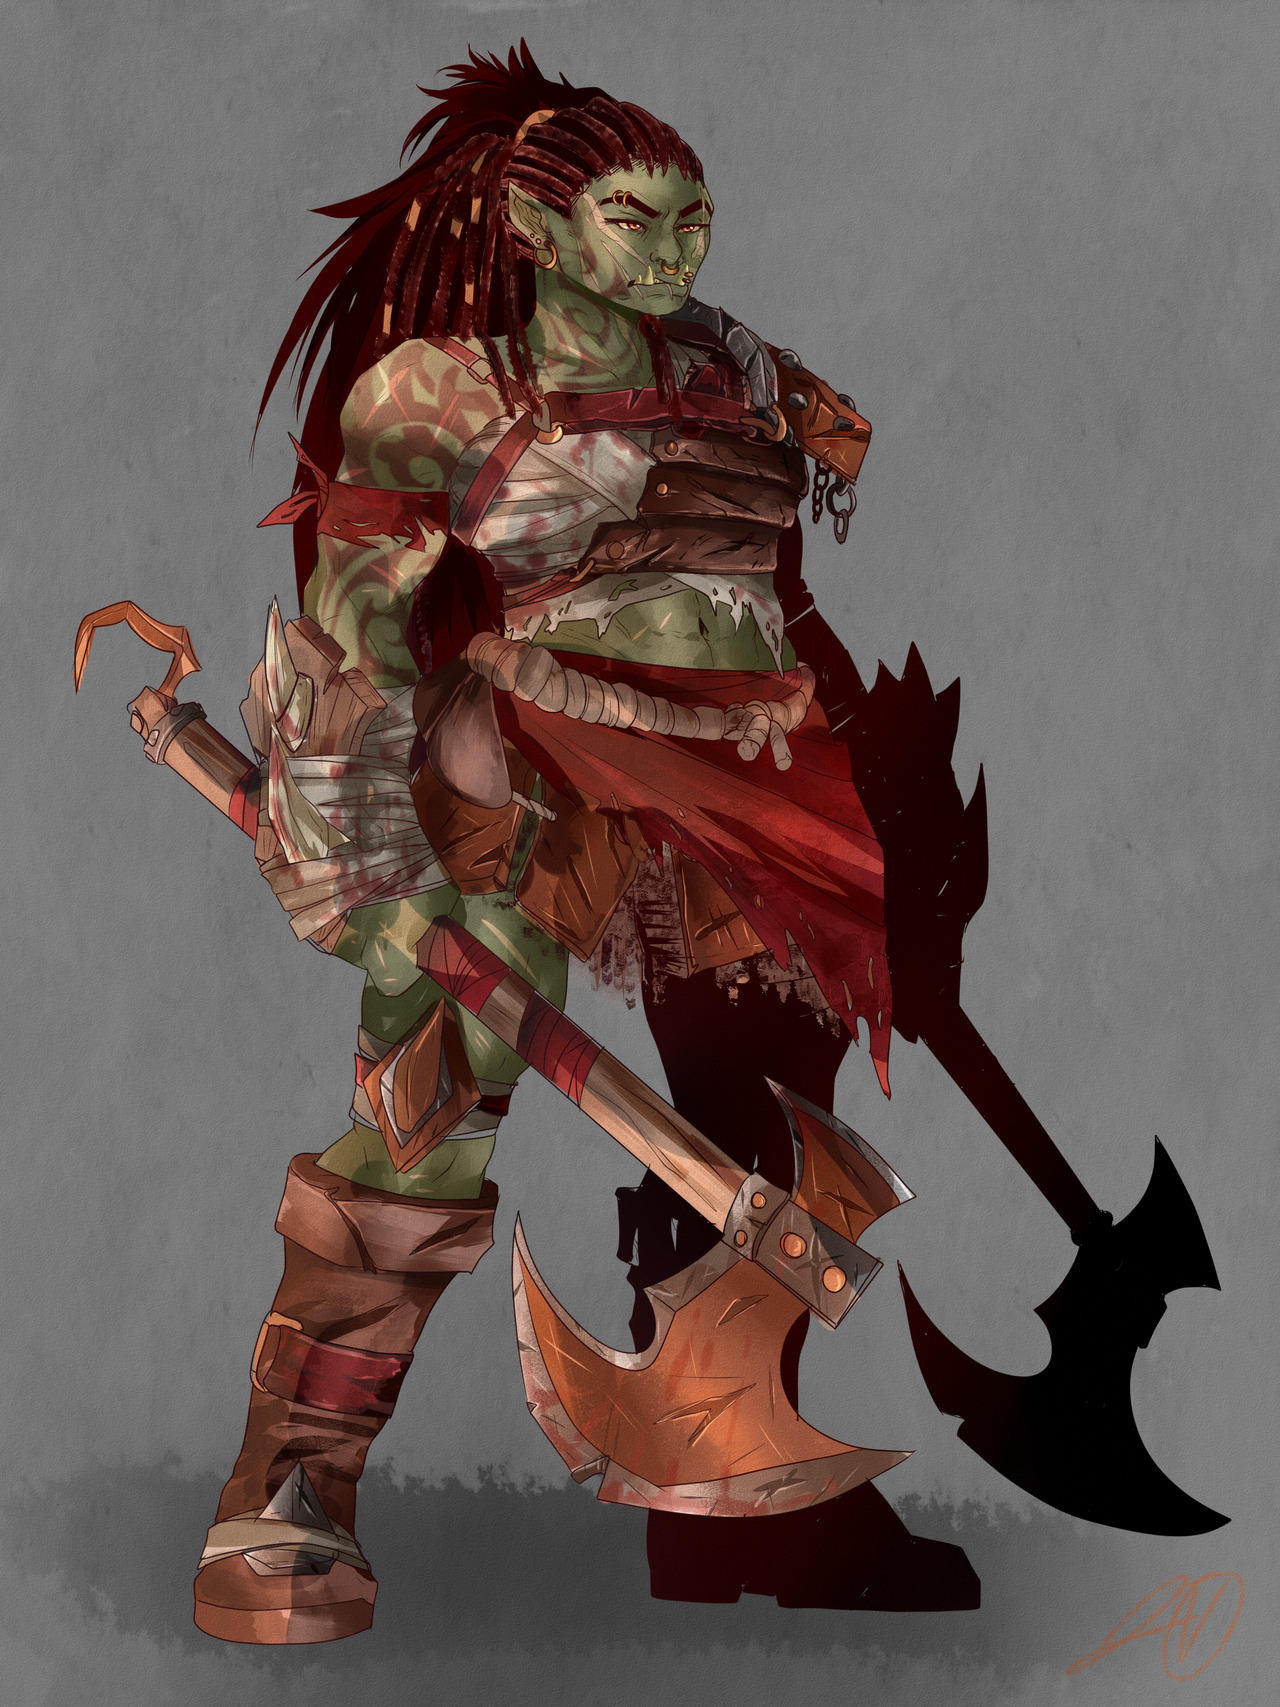 I’m finally learning how to play D&amp;D with my buddies so here’s my Half-Orc